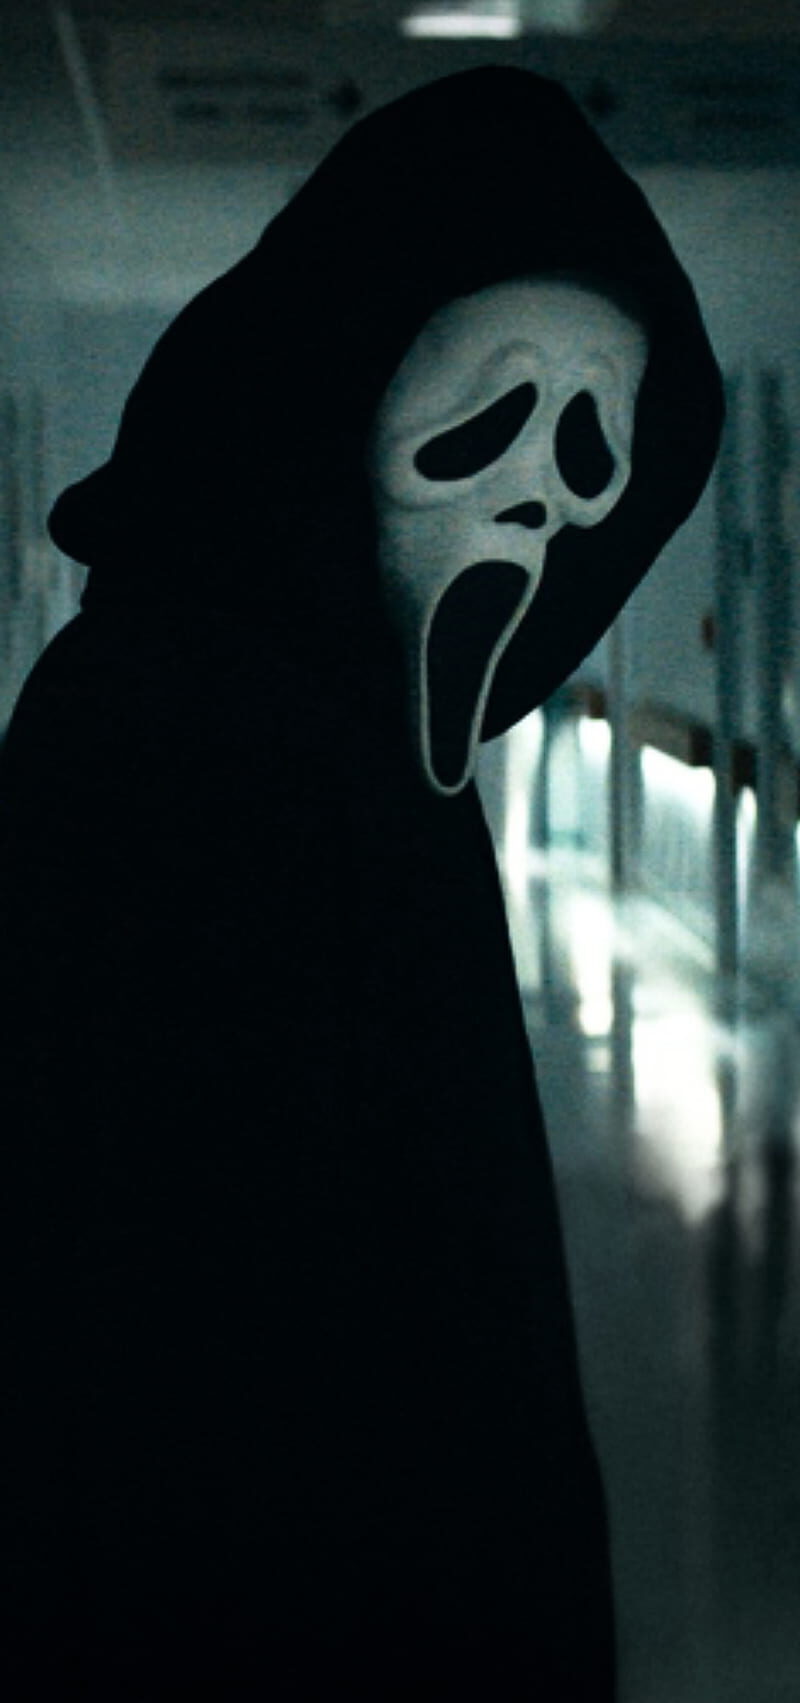 10 Ghostface Scream HD Wallpapers and Backgrounds